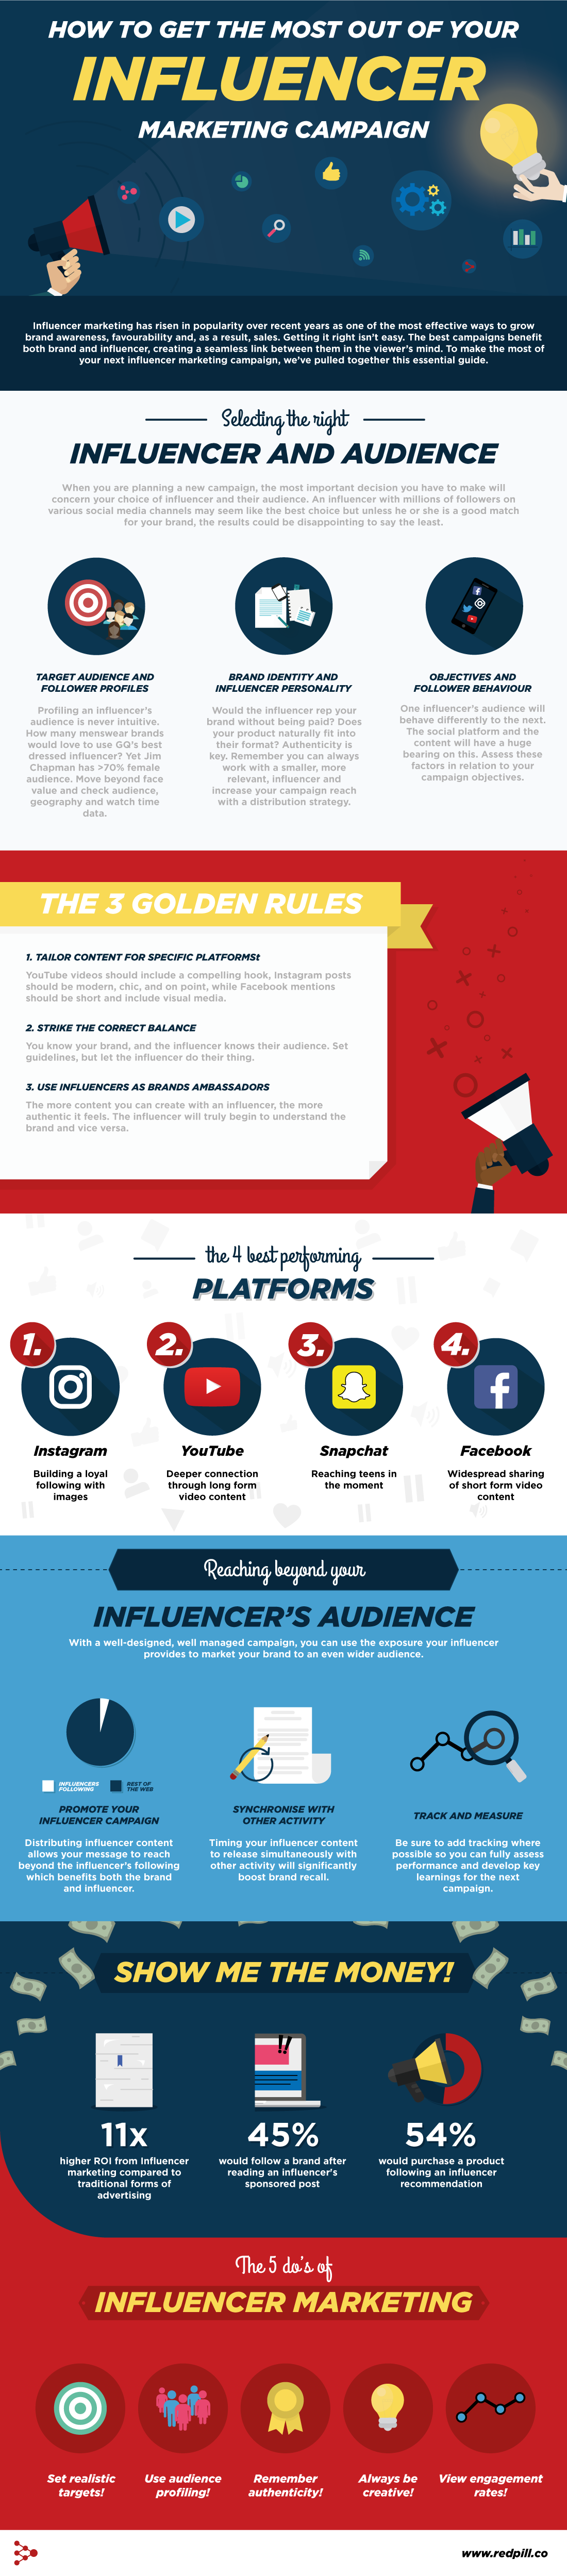 Influencer marketing campaign infographic